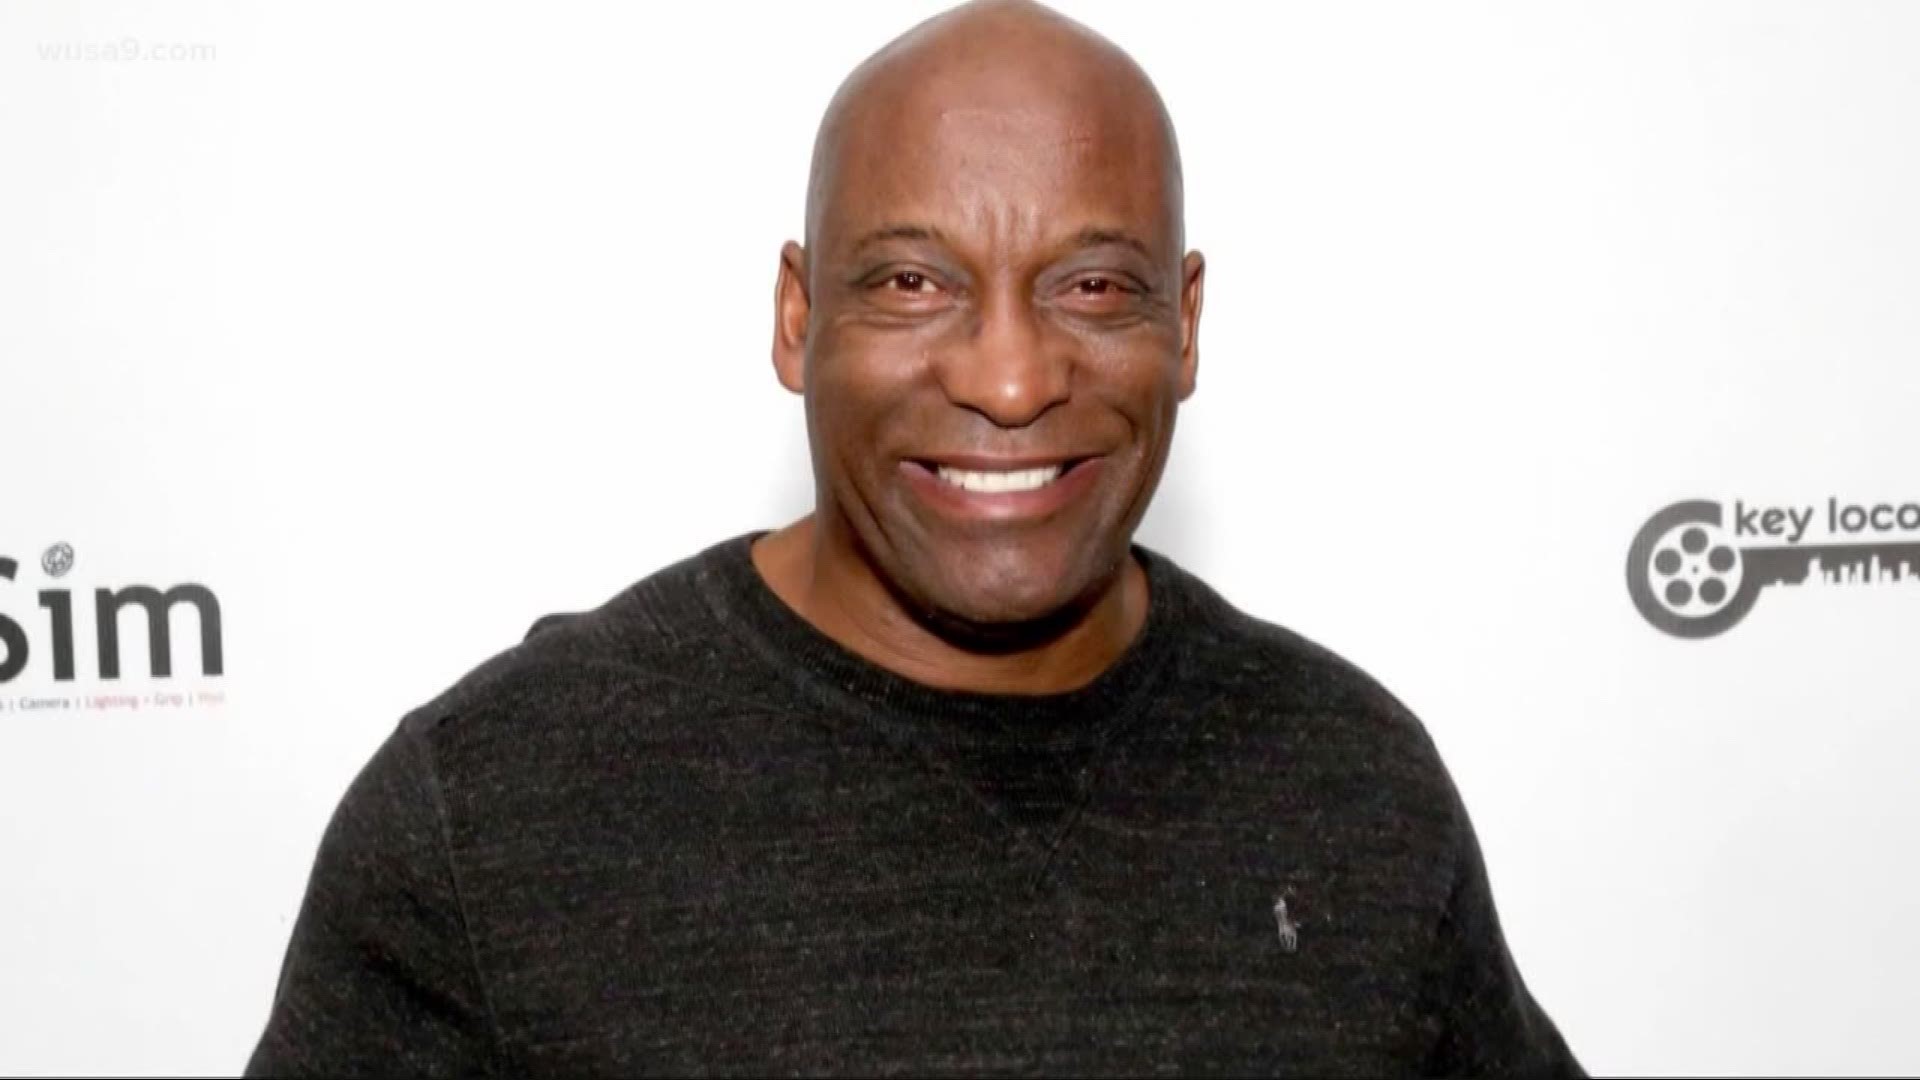 Director John Singleton, who made one of Hollywood's most memorable debuts with the Oscar-nominated "Boyz N the Hood" and continued over the following decades to probe the lives of black communities in his native Los Angeles and beyond, has died. He was 51.